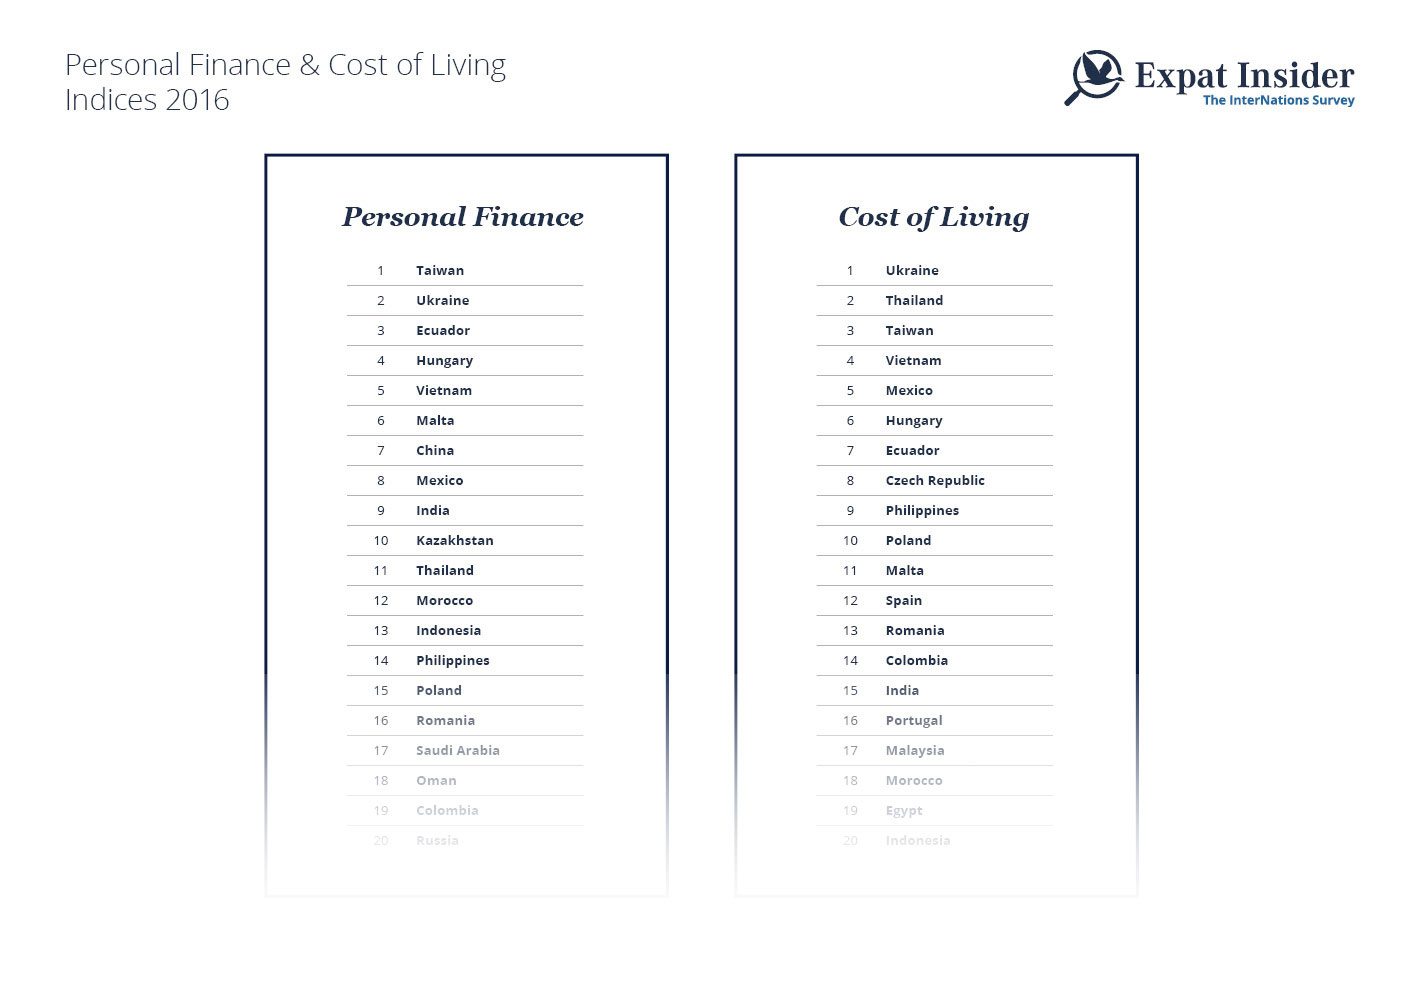 Personal Finance & Cost of Living Indices 2016